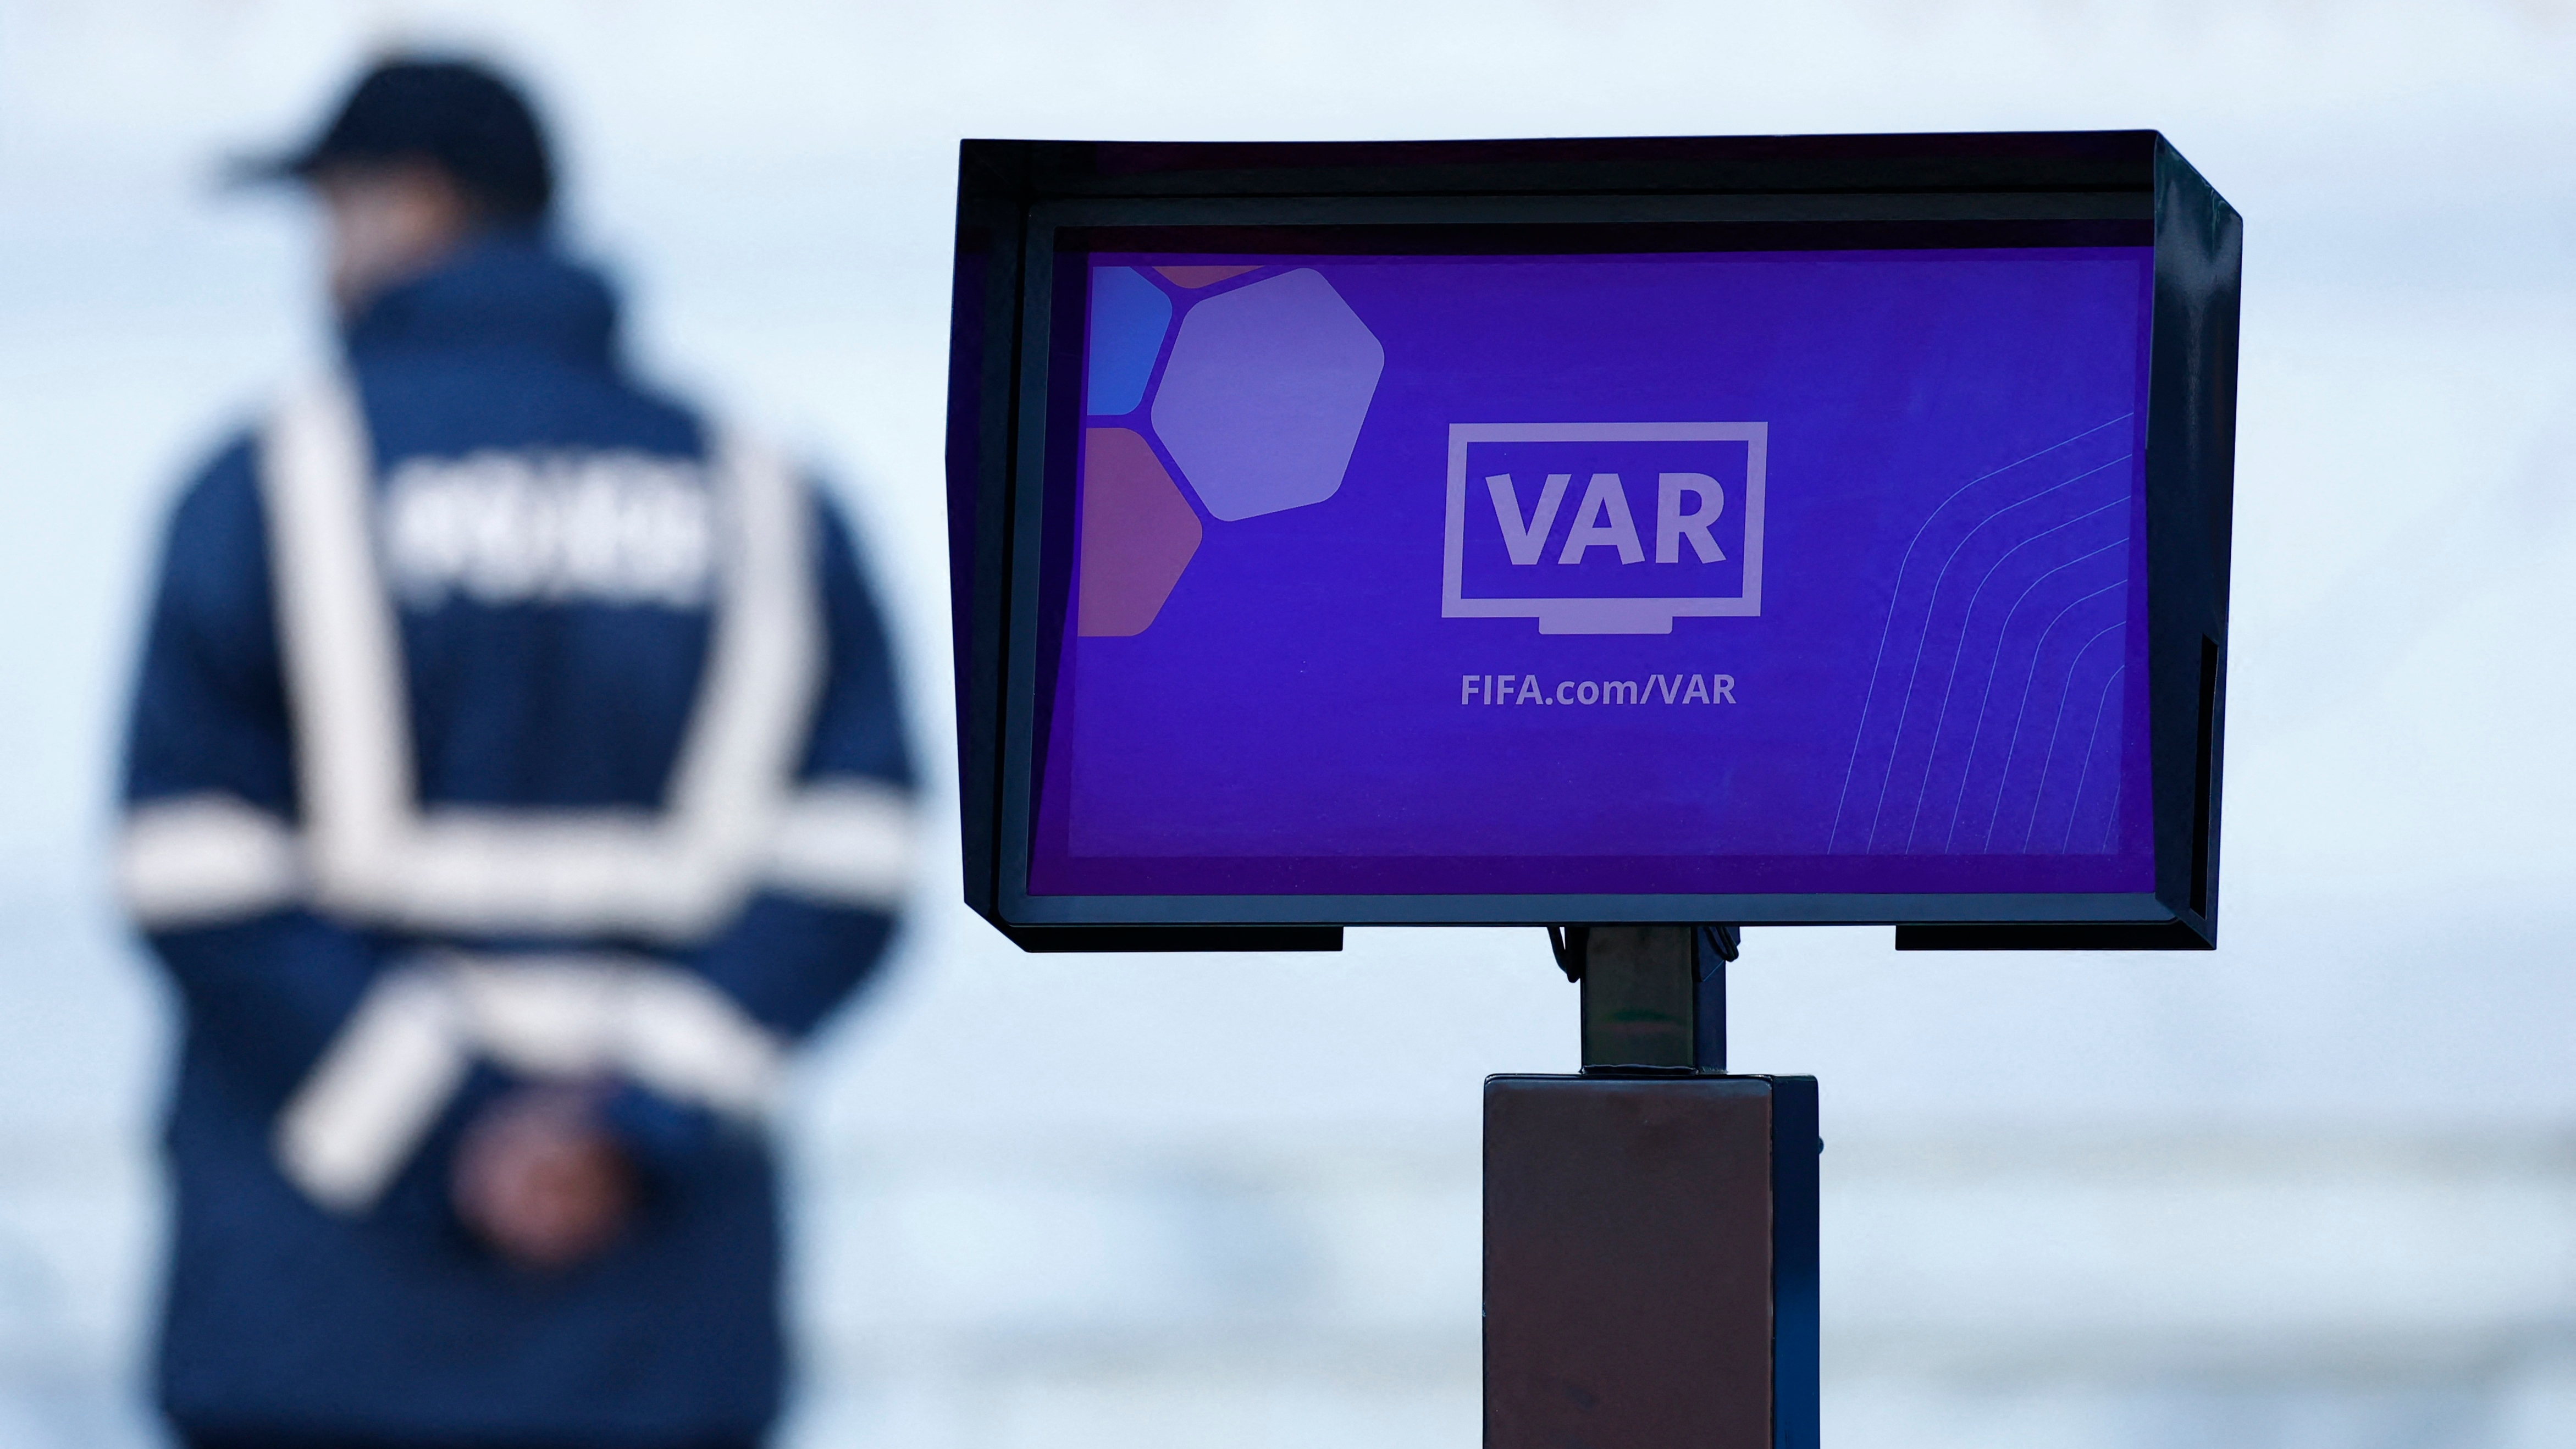 Soccer Football - FIFA Club World Cup - Second Round - Wydad Casablanca v Al Hilal - Prince Moulay Abdellah Stadium, Rabat, Morocco - February 4, 2023 General view of the VAR monitor REUTERS/Andrew Boyers